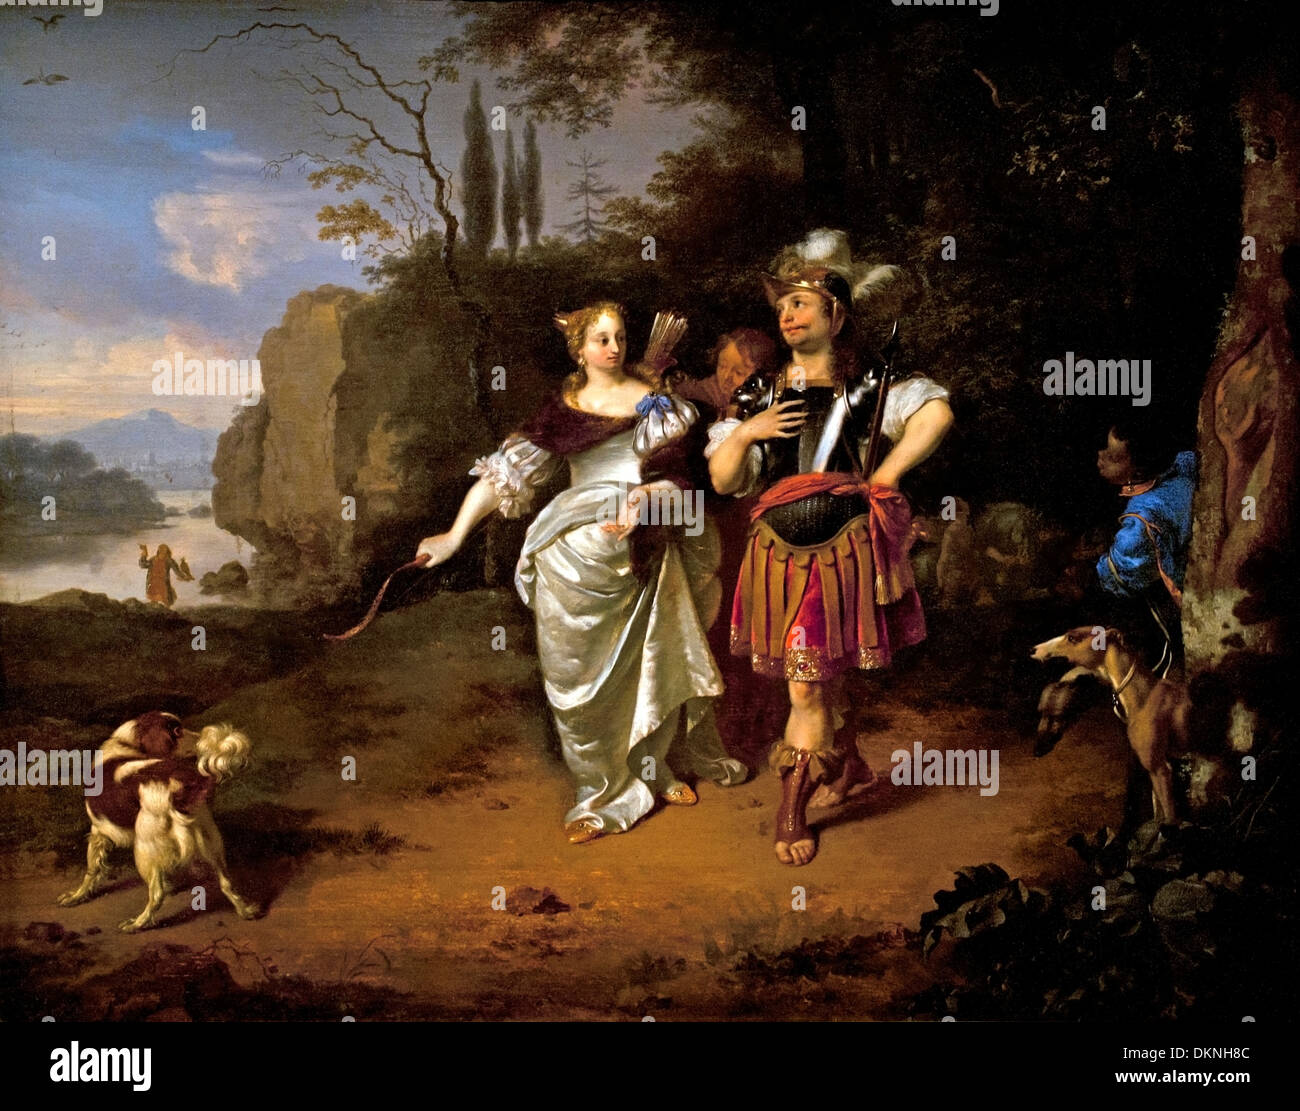 Dido and Aenas hunting, 1660 Arie de Vois 1,632-1680,  Dutch Netherlands Stock Photo